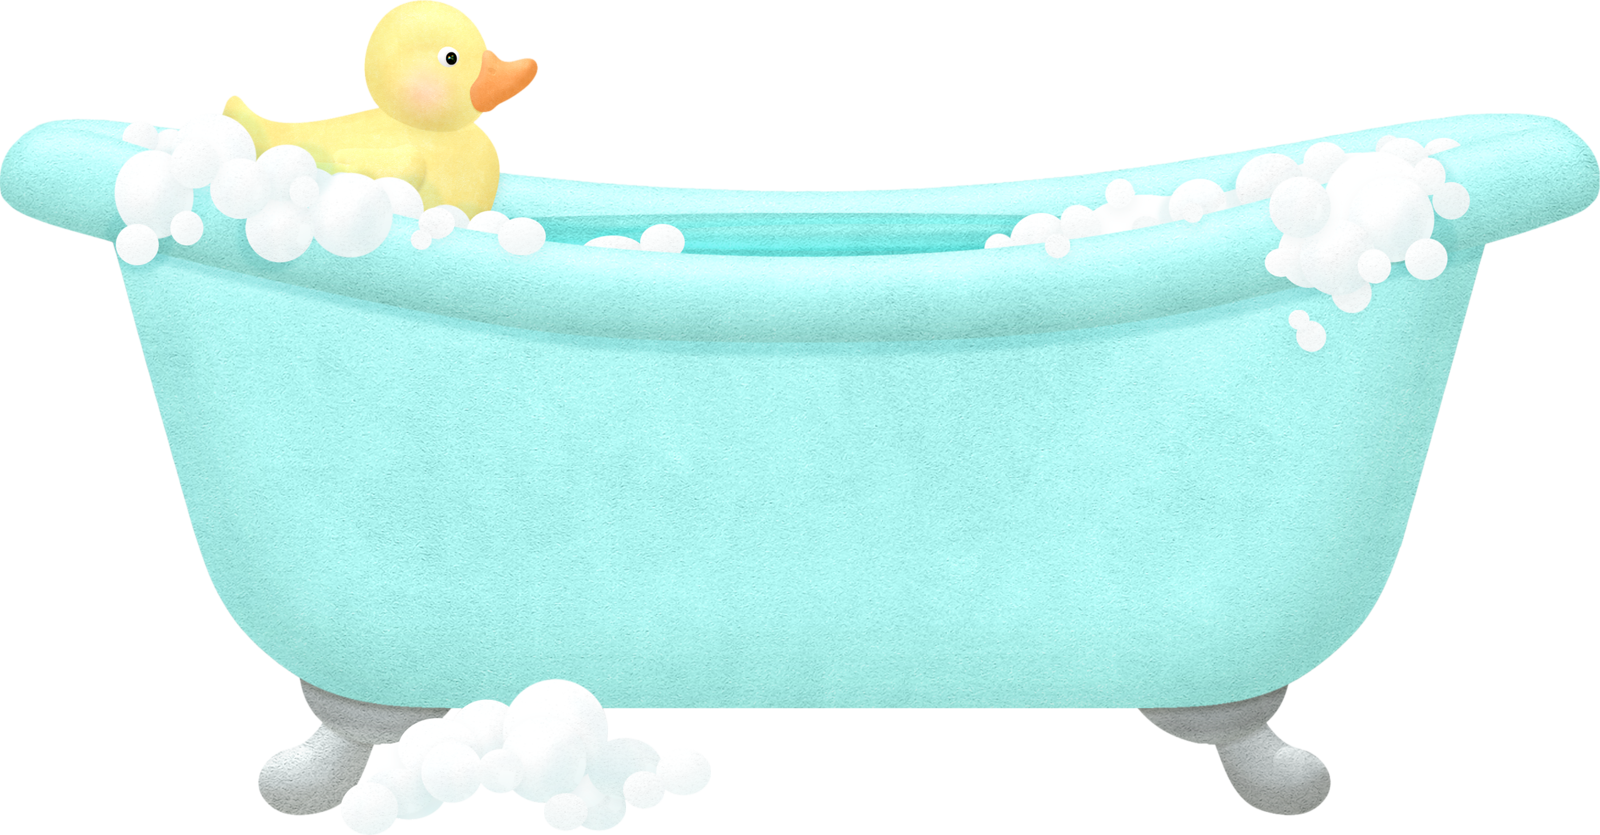 Squeaky clean scrap and. Dogs clipart bath tub